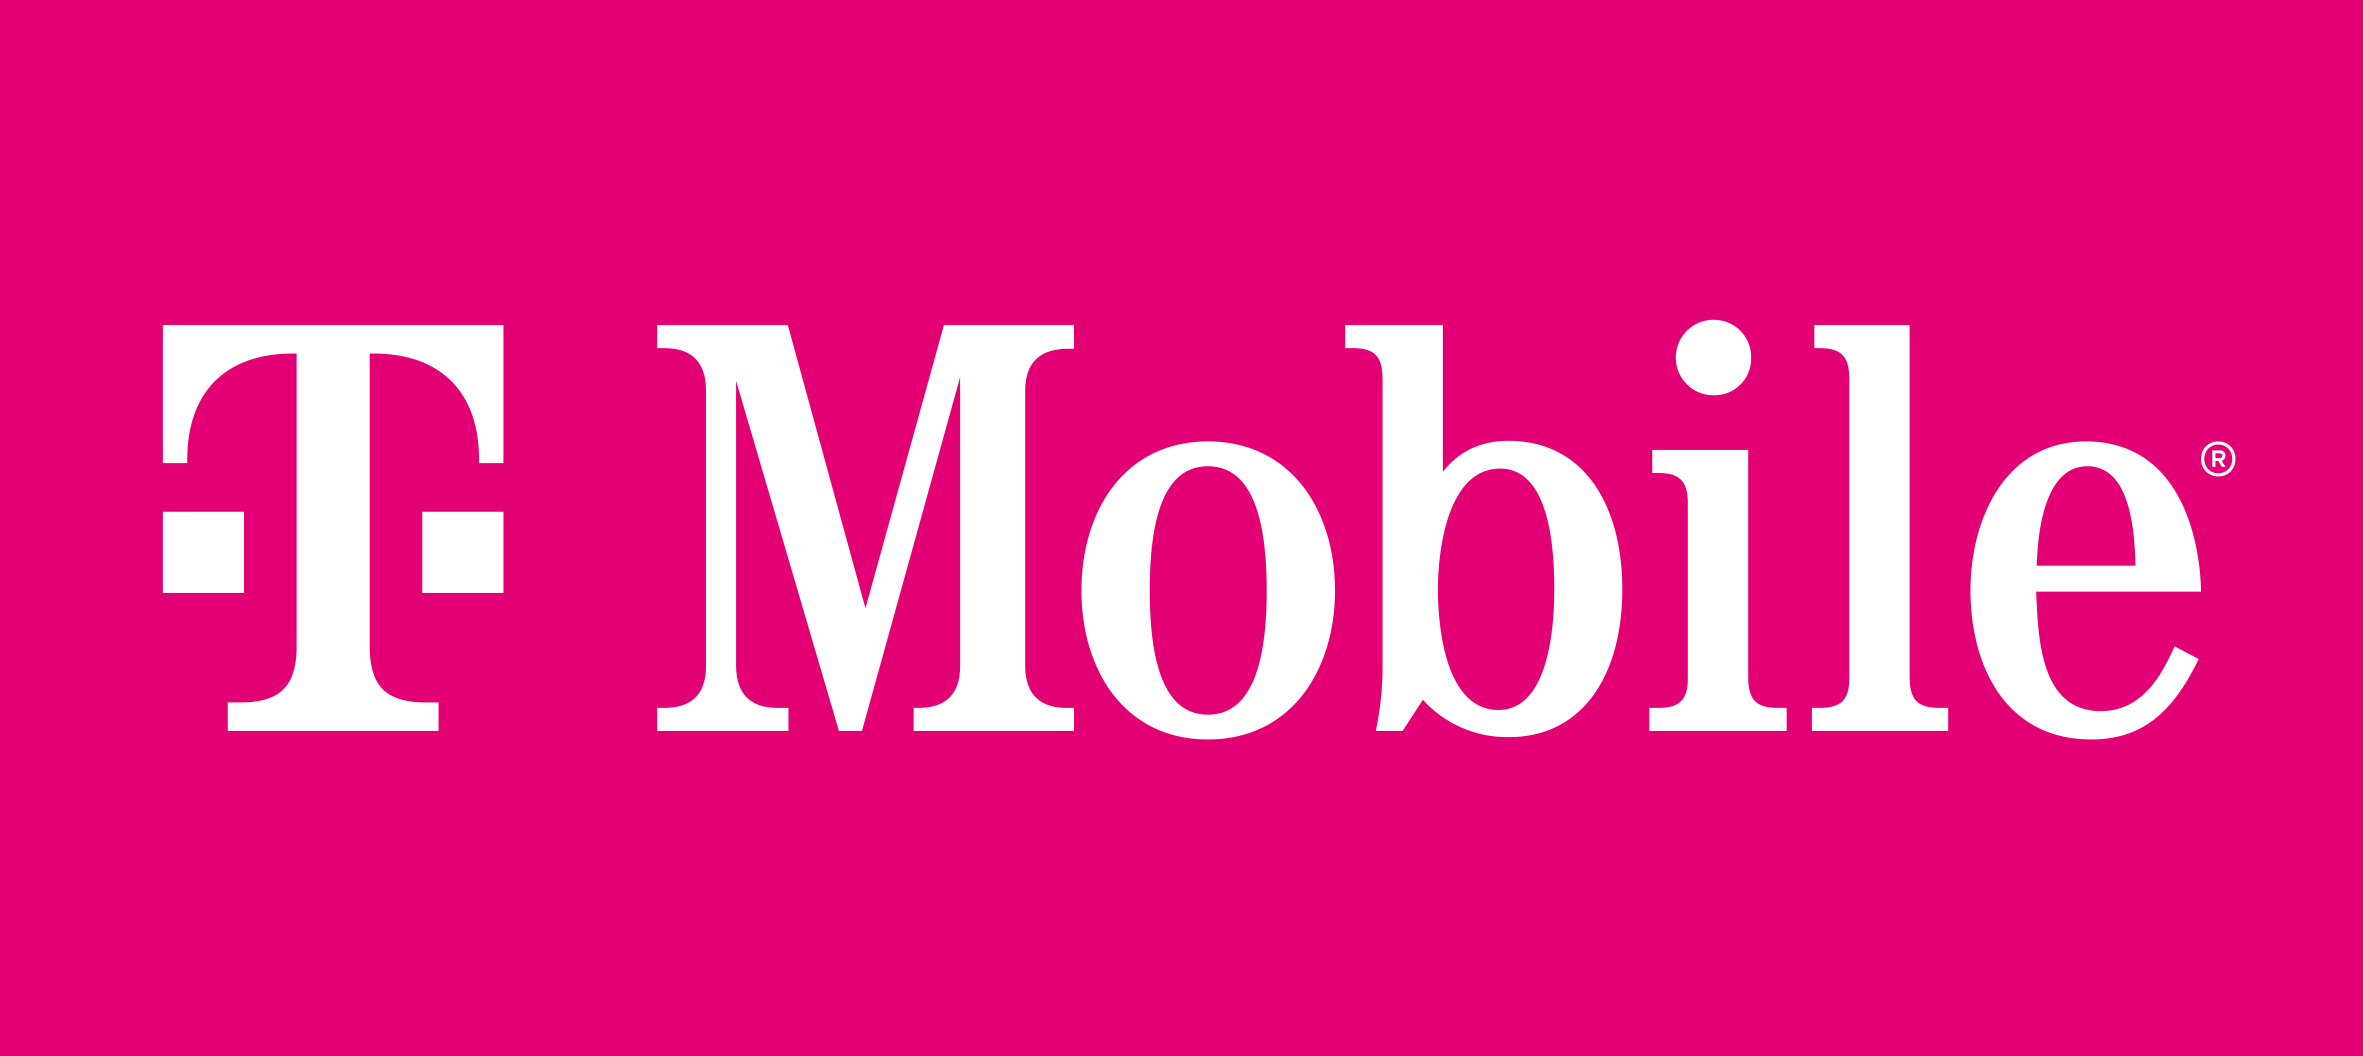 YMMV, In-Store for T-Mobile Customers with Non-5G Phones: Free (via Bill Credits) iPhone SE 3rd Gen, No Trade-In Required, Worked for Simple Choice, Support Fee and Taxes Apply